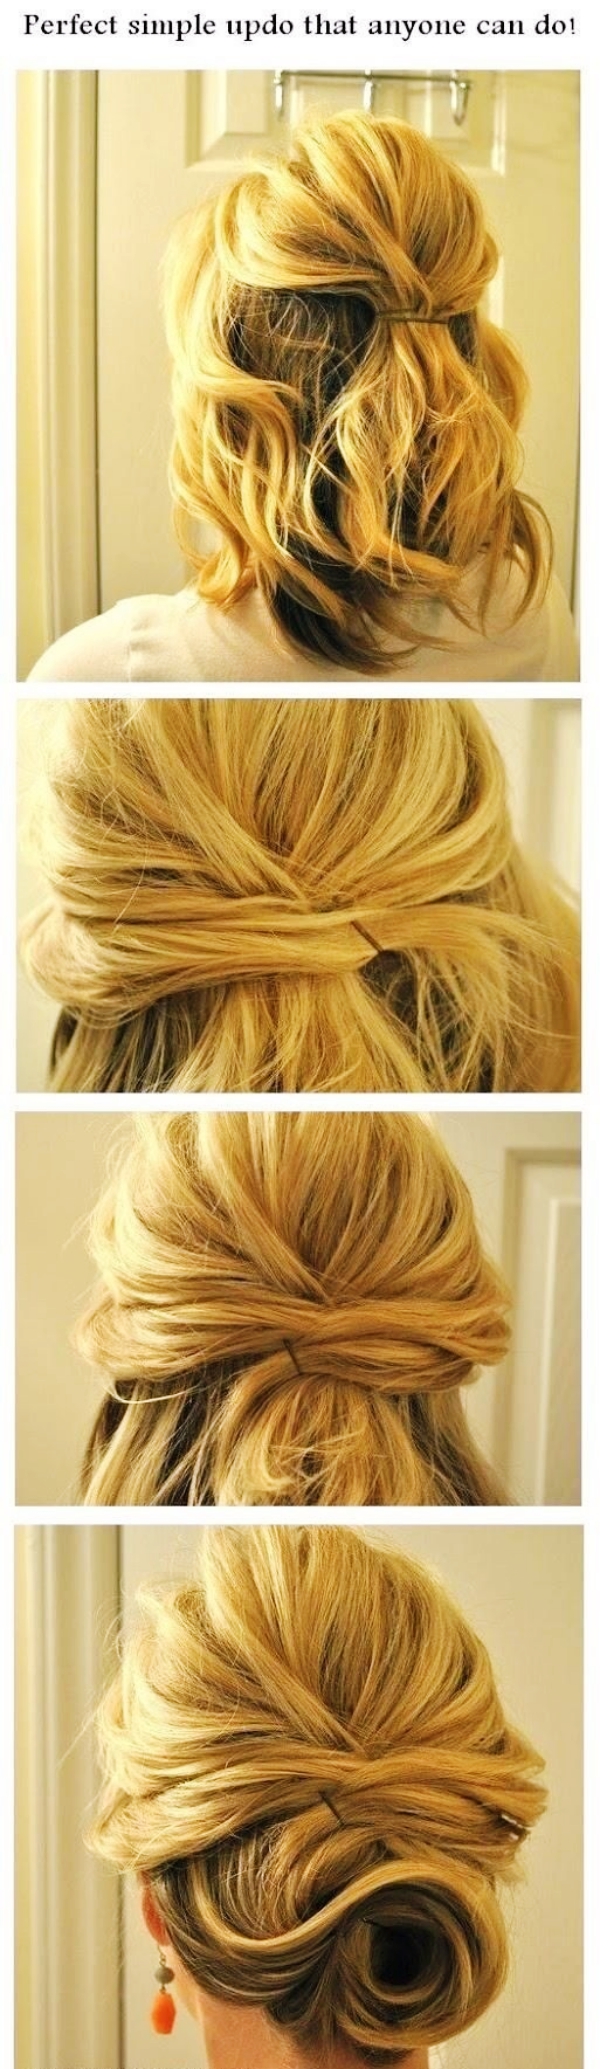 Perfect-Wedding-Hairstyles-for-Short-Hair